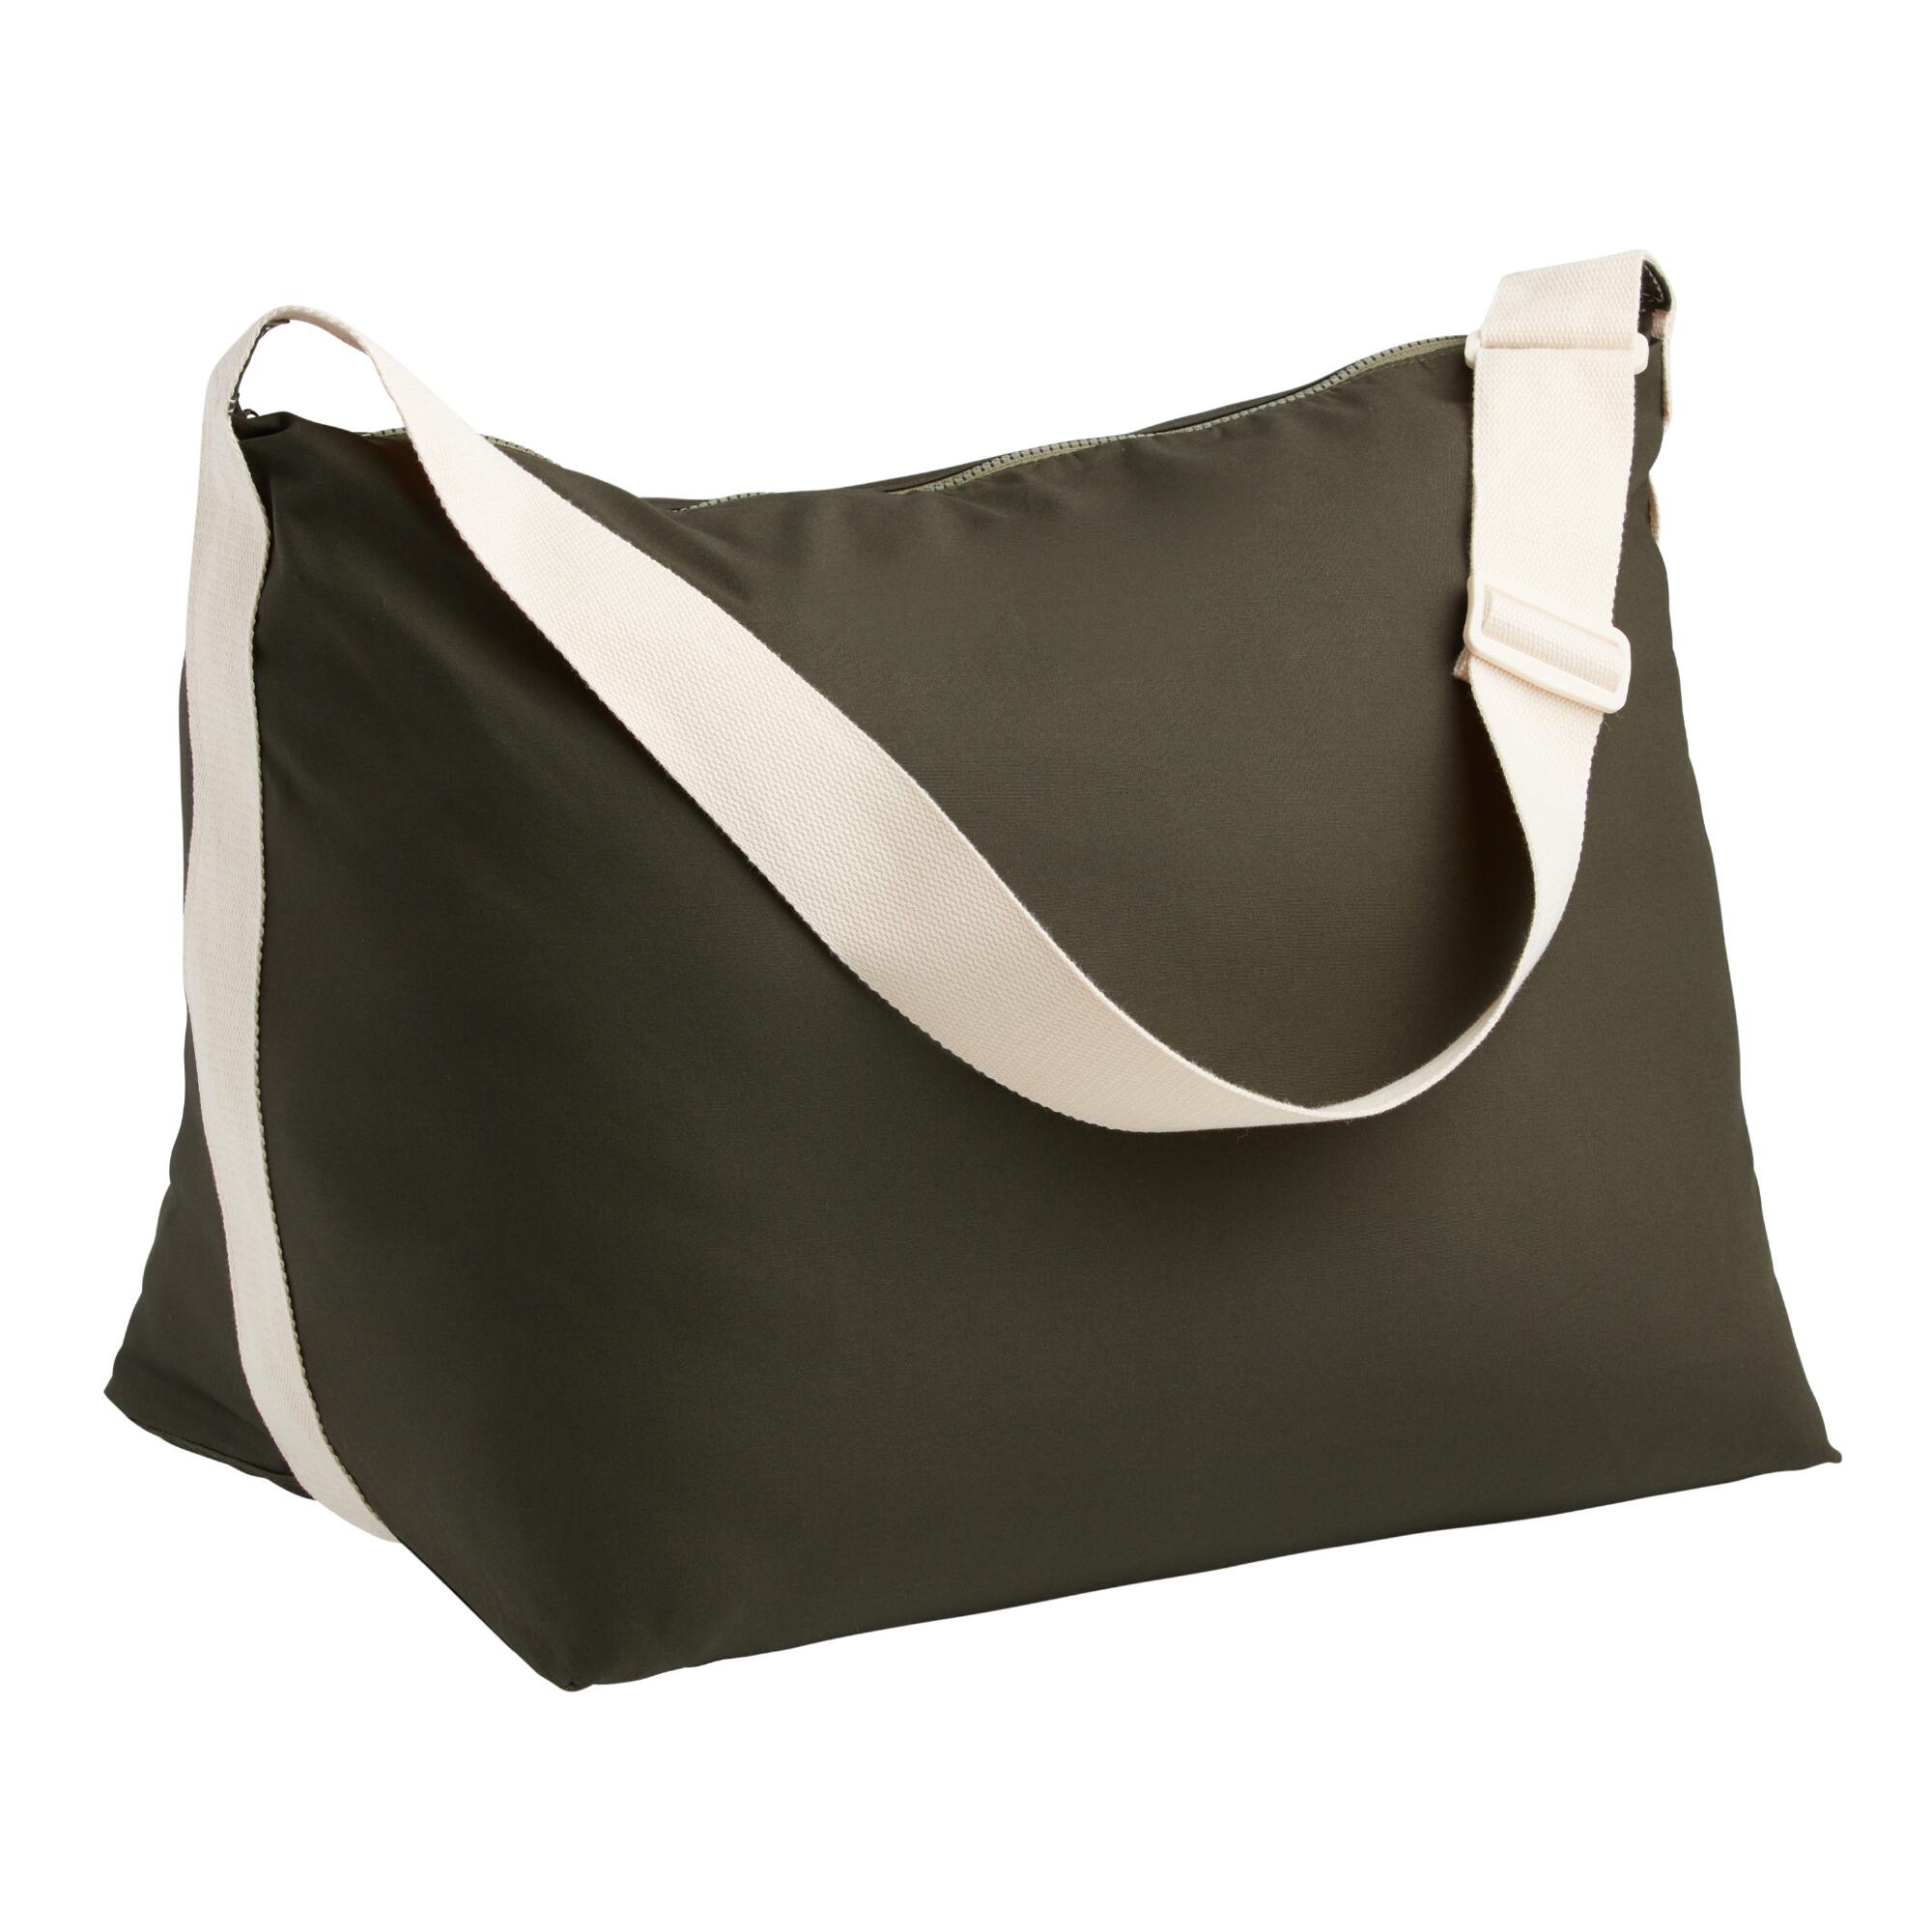 Olive Green And White Hobo Bag by World Market